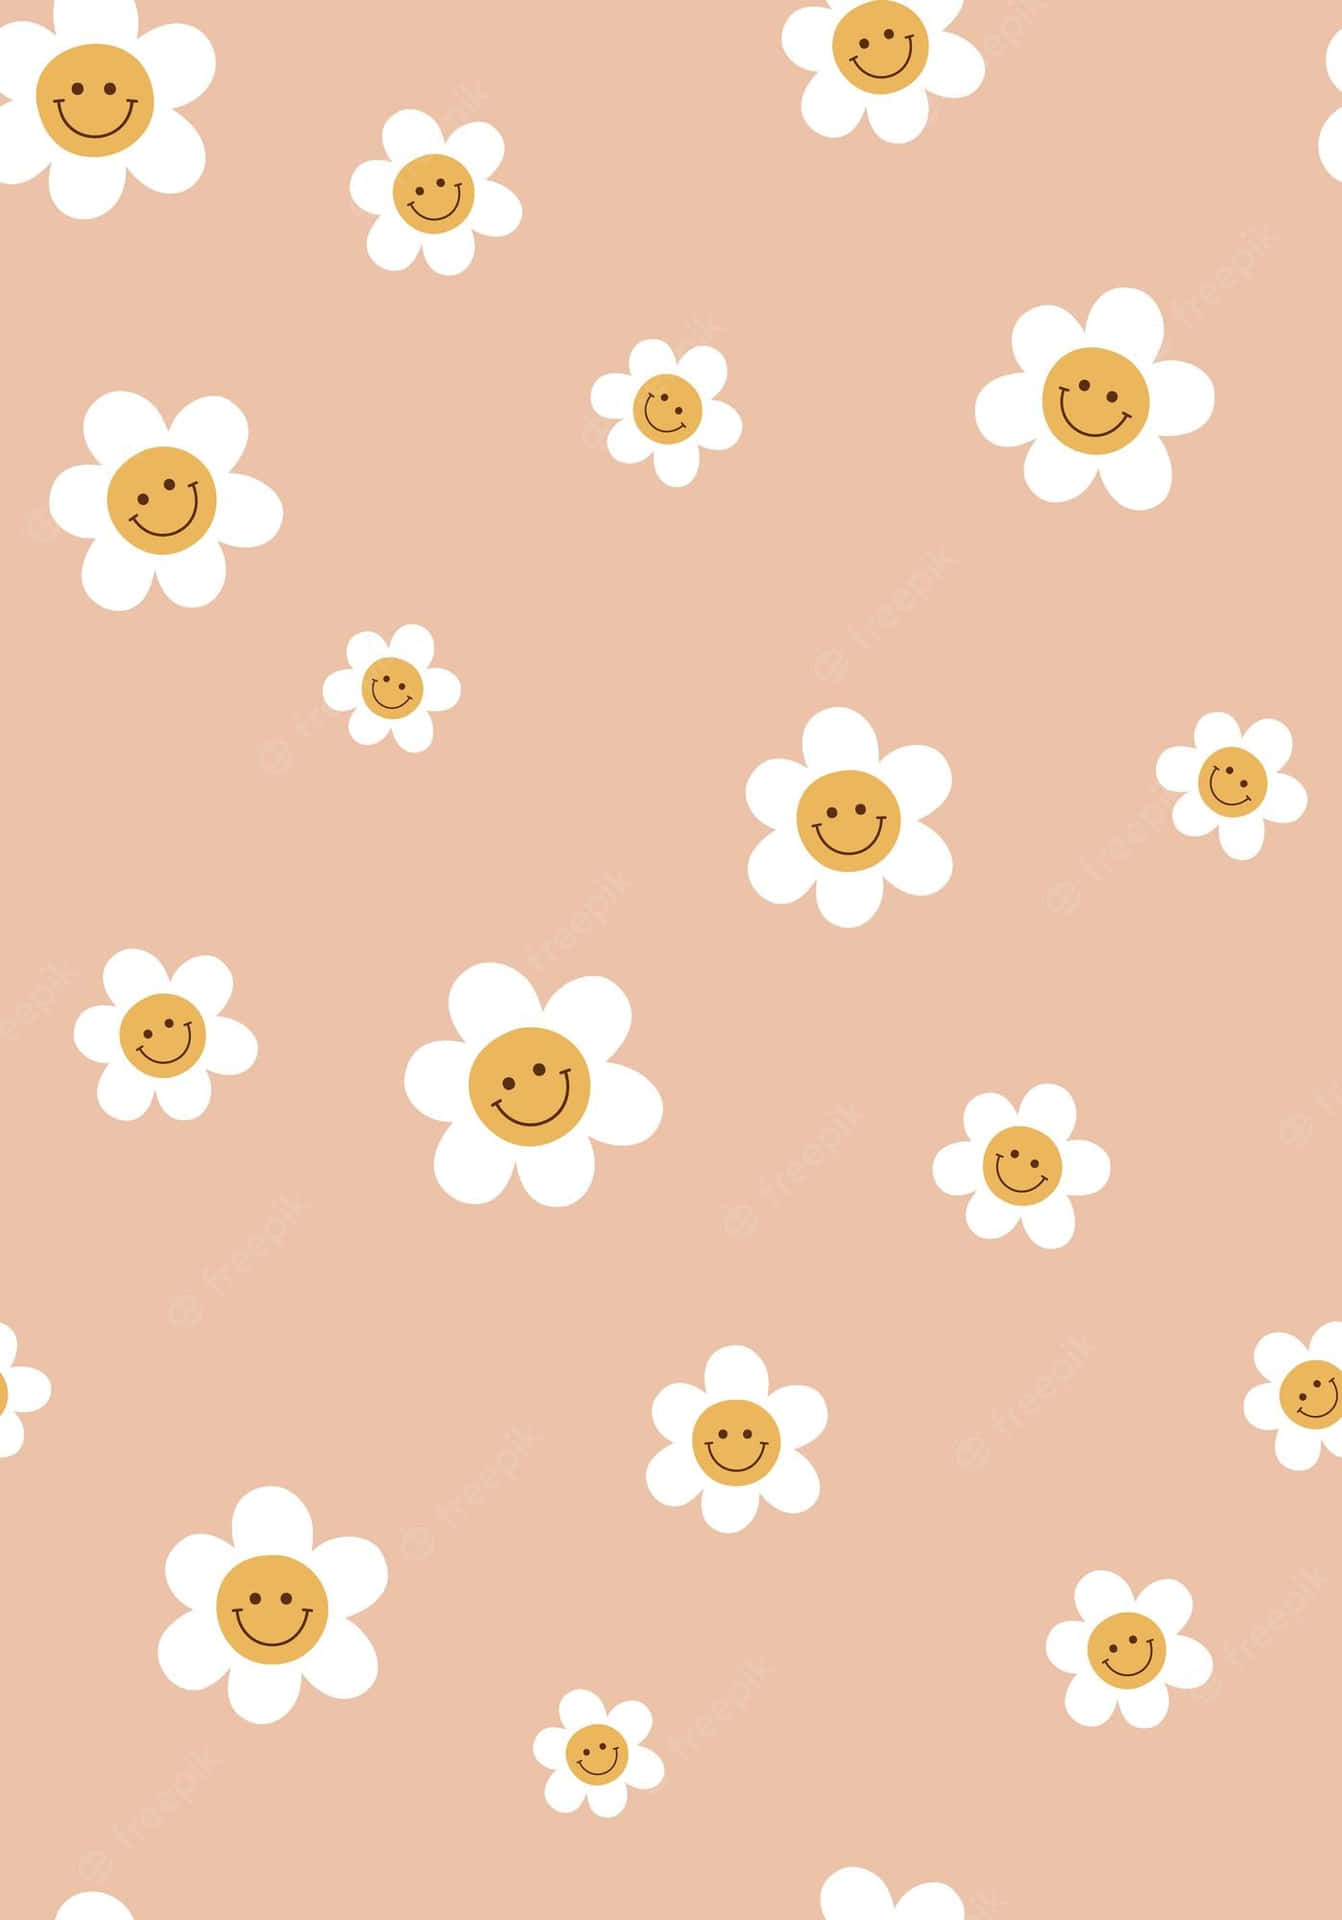 Celebrate vintage style with this colorful 70's Floral wallpaper Wallpaper